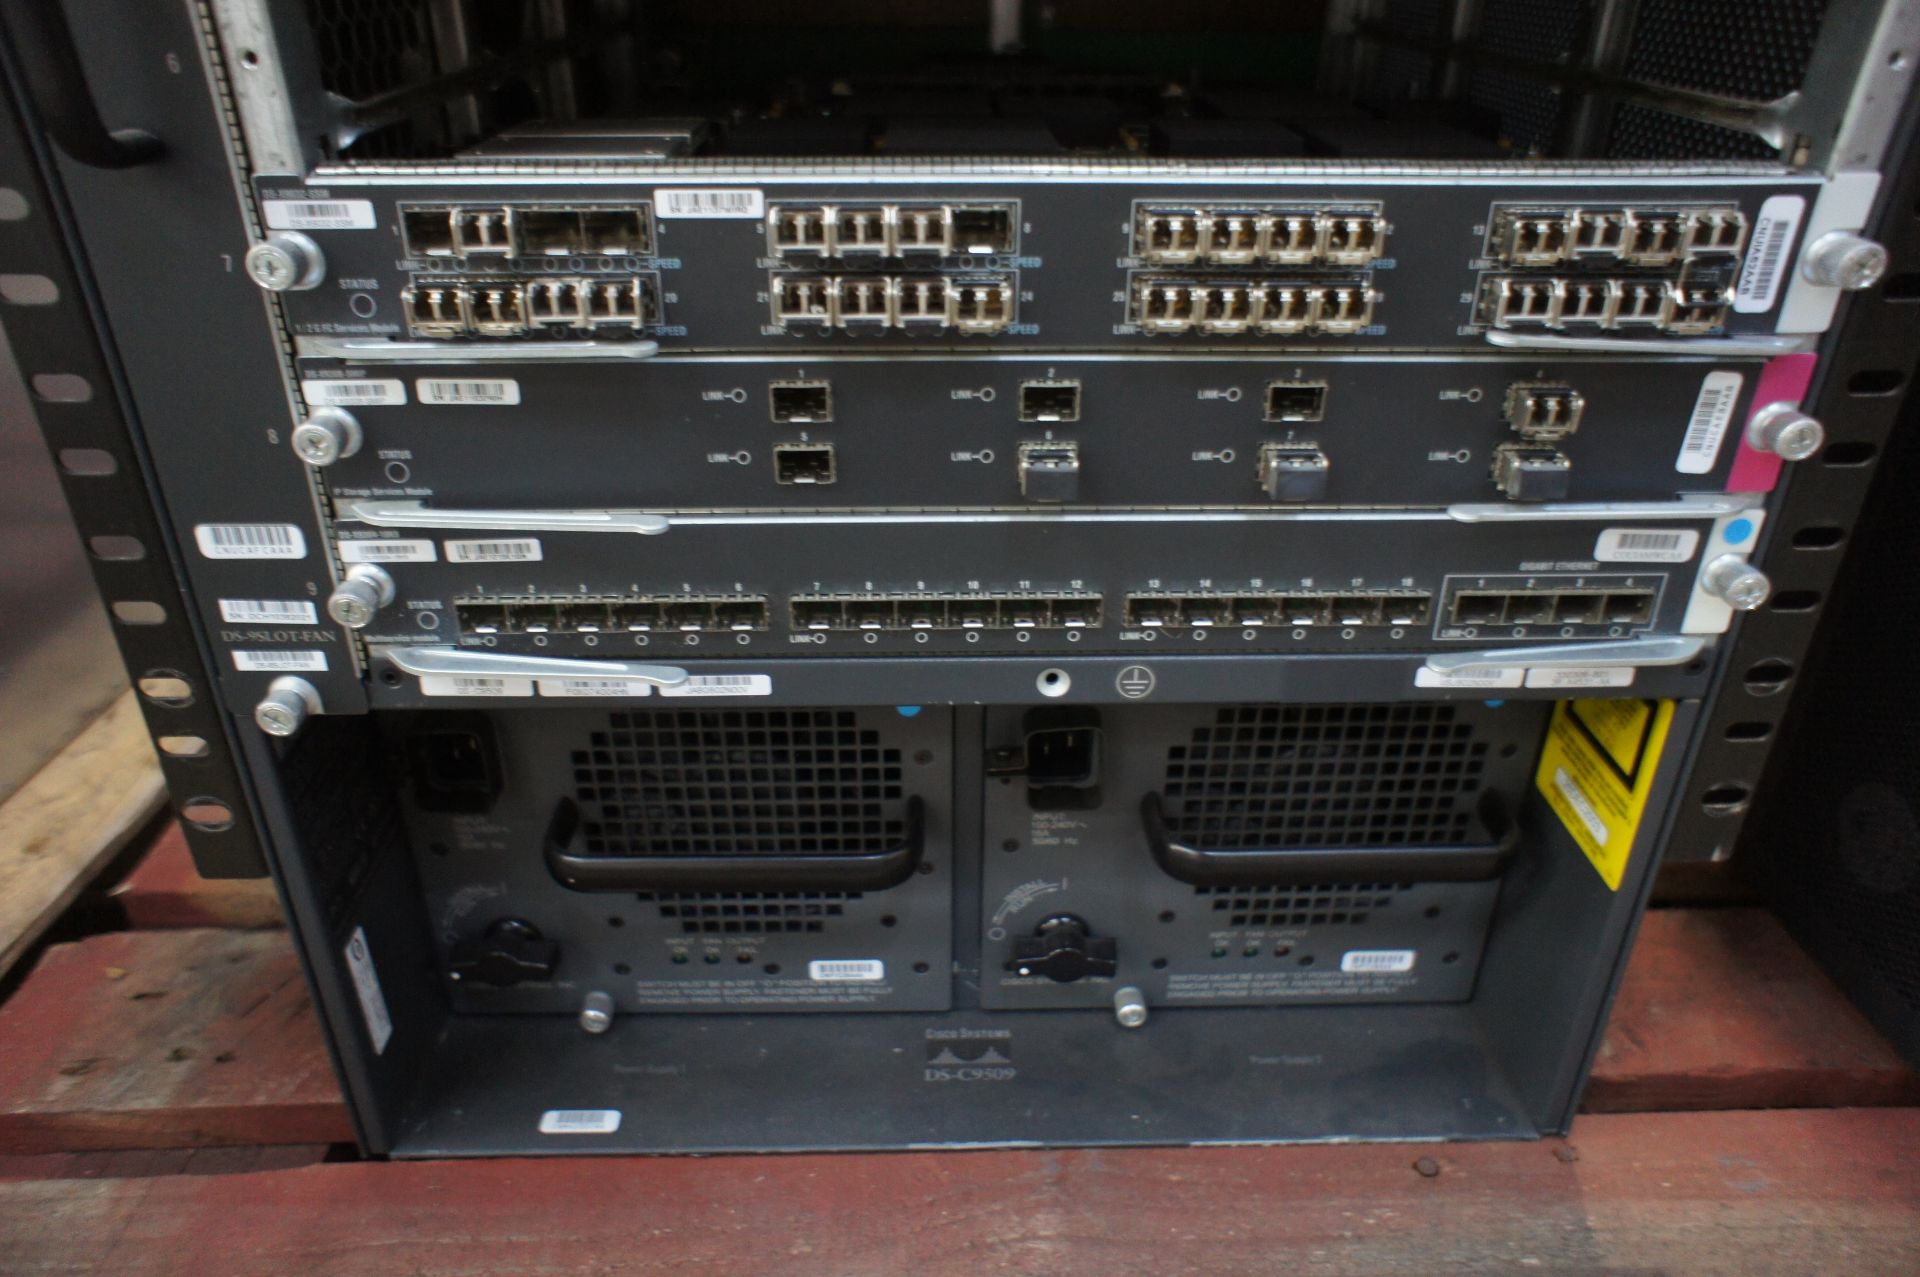 IBM 2109-M48 SAN256 director cabinet with 8x FC4/32 cards and 2x CP4 cards,CNT Ultranet storage - Image 11 of 30